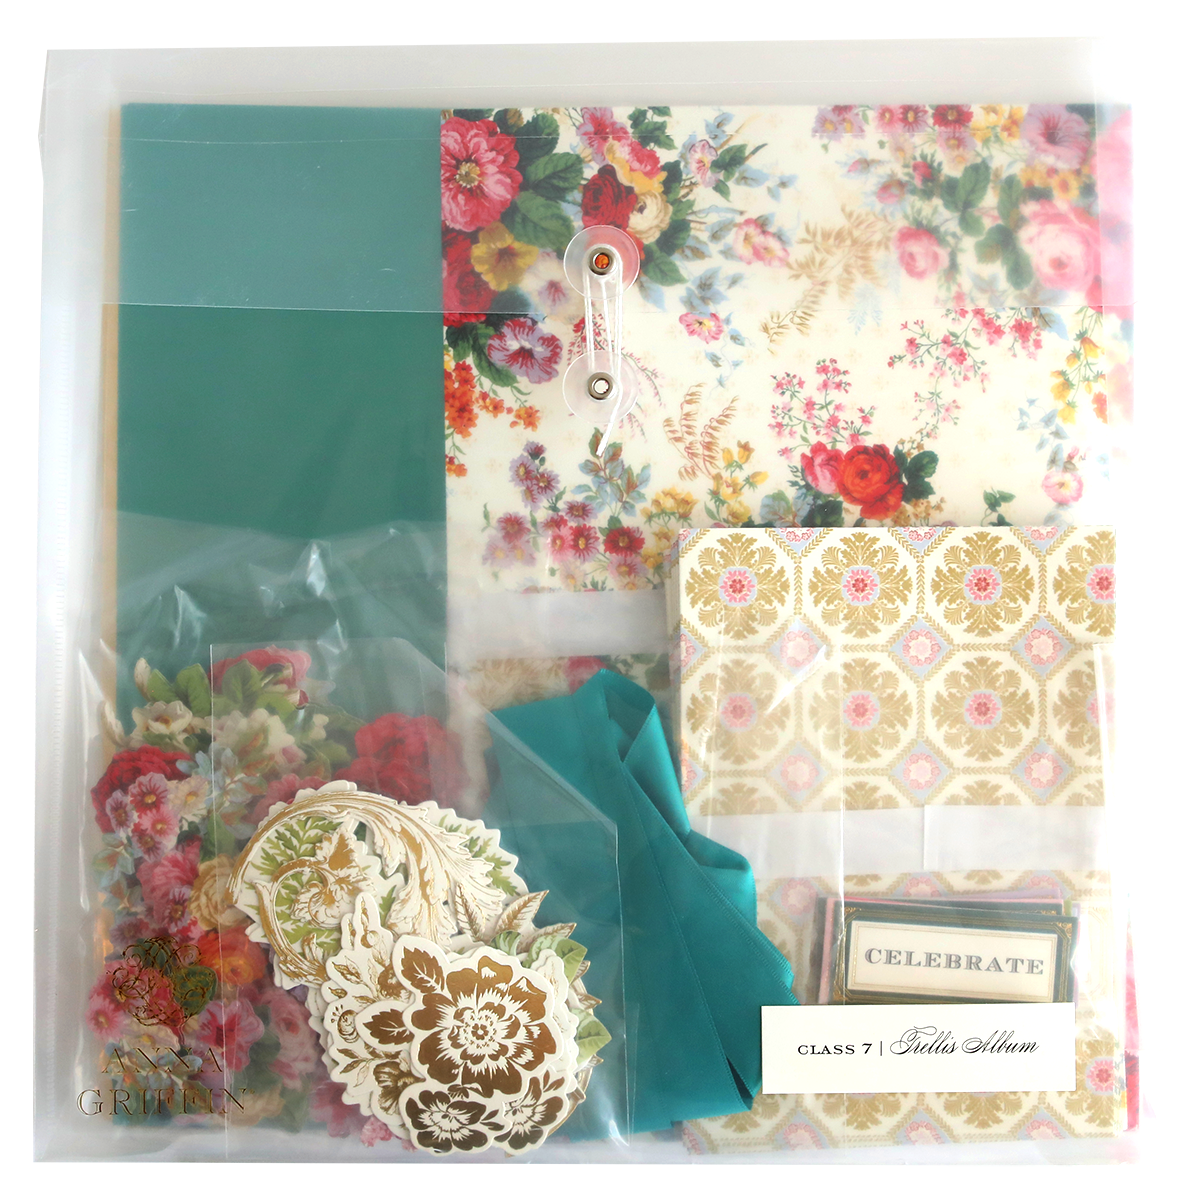 A gift bag filled with a variety of Trellis Album Class Materials and Dies and crafting supplies.